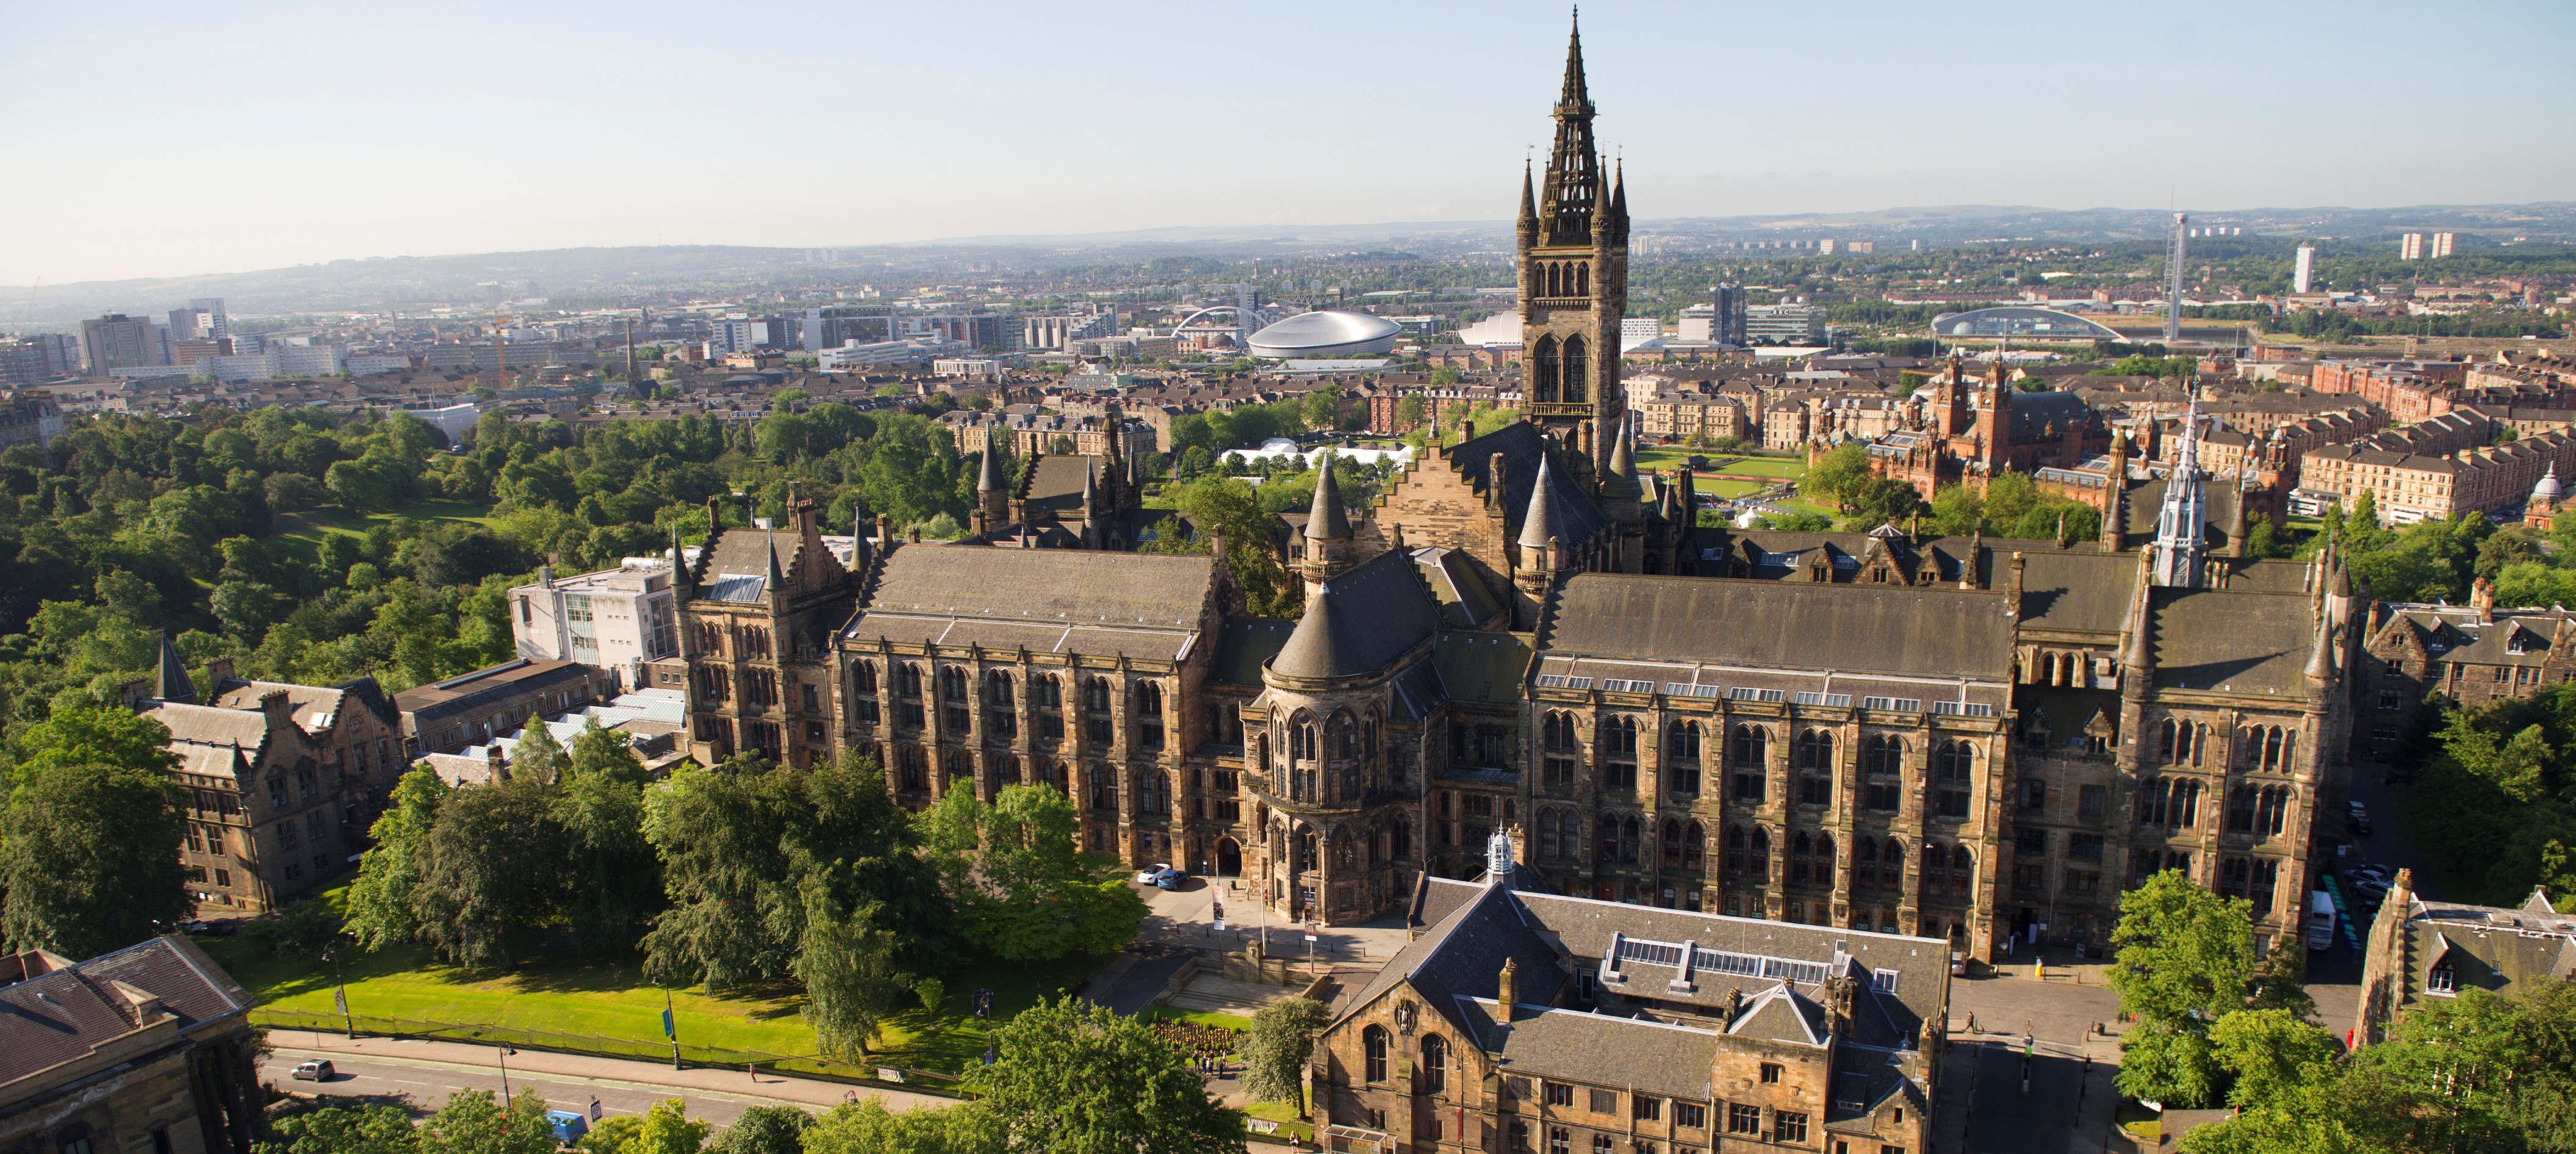 The Main Building of the University of Glasgow pictured in front of the South West of Glasgow